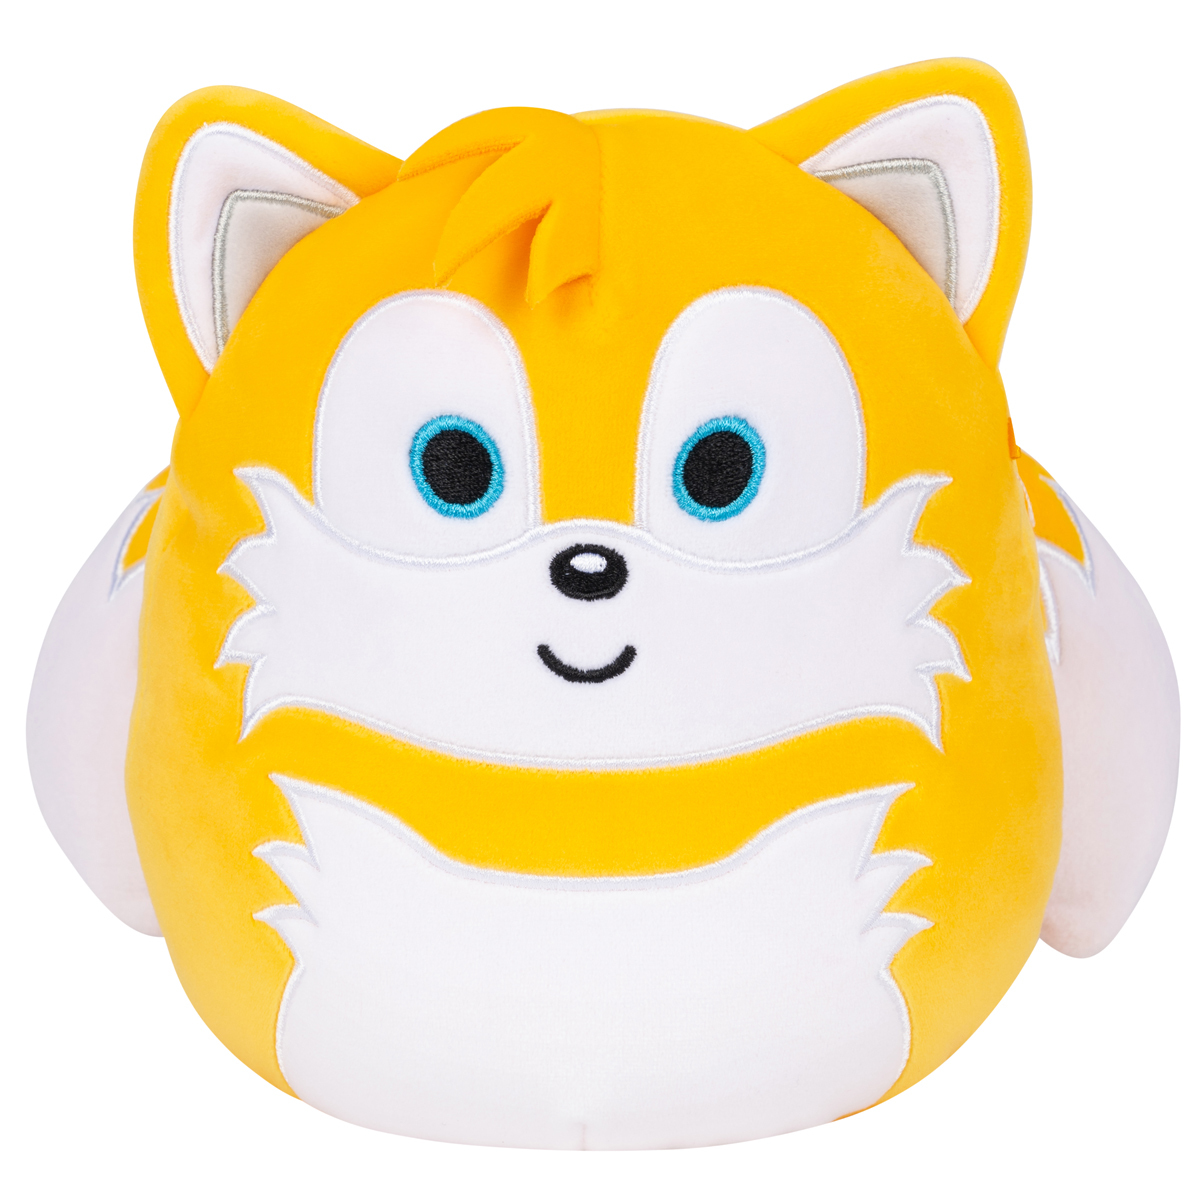 Squishmallow 8 Inch Sonic the Hedgehog Tails Plush Toy